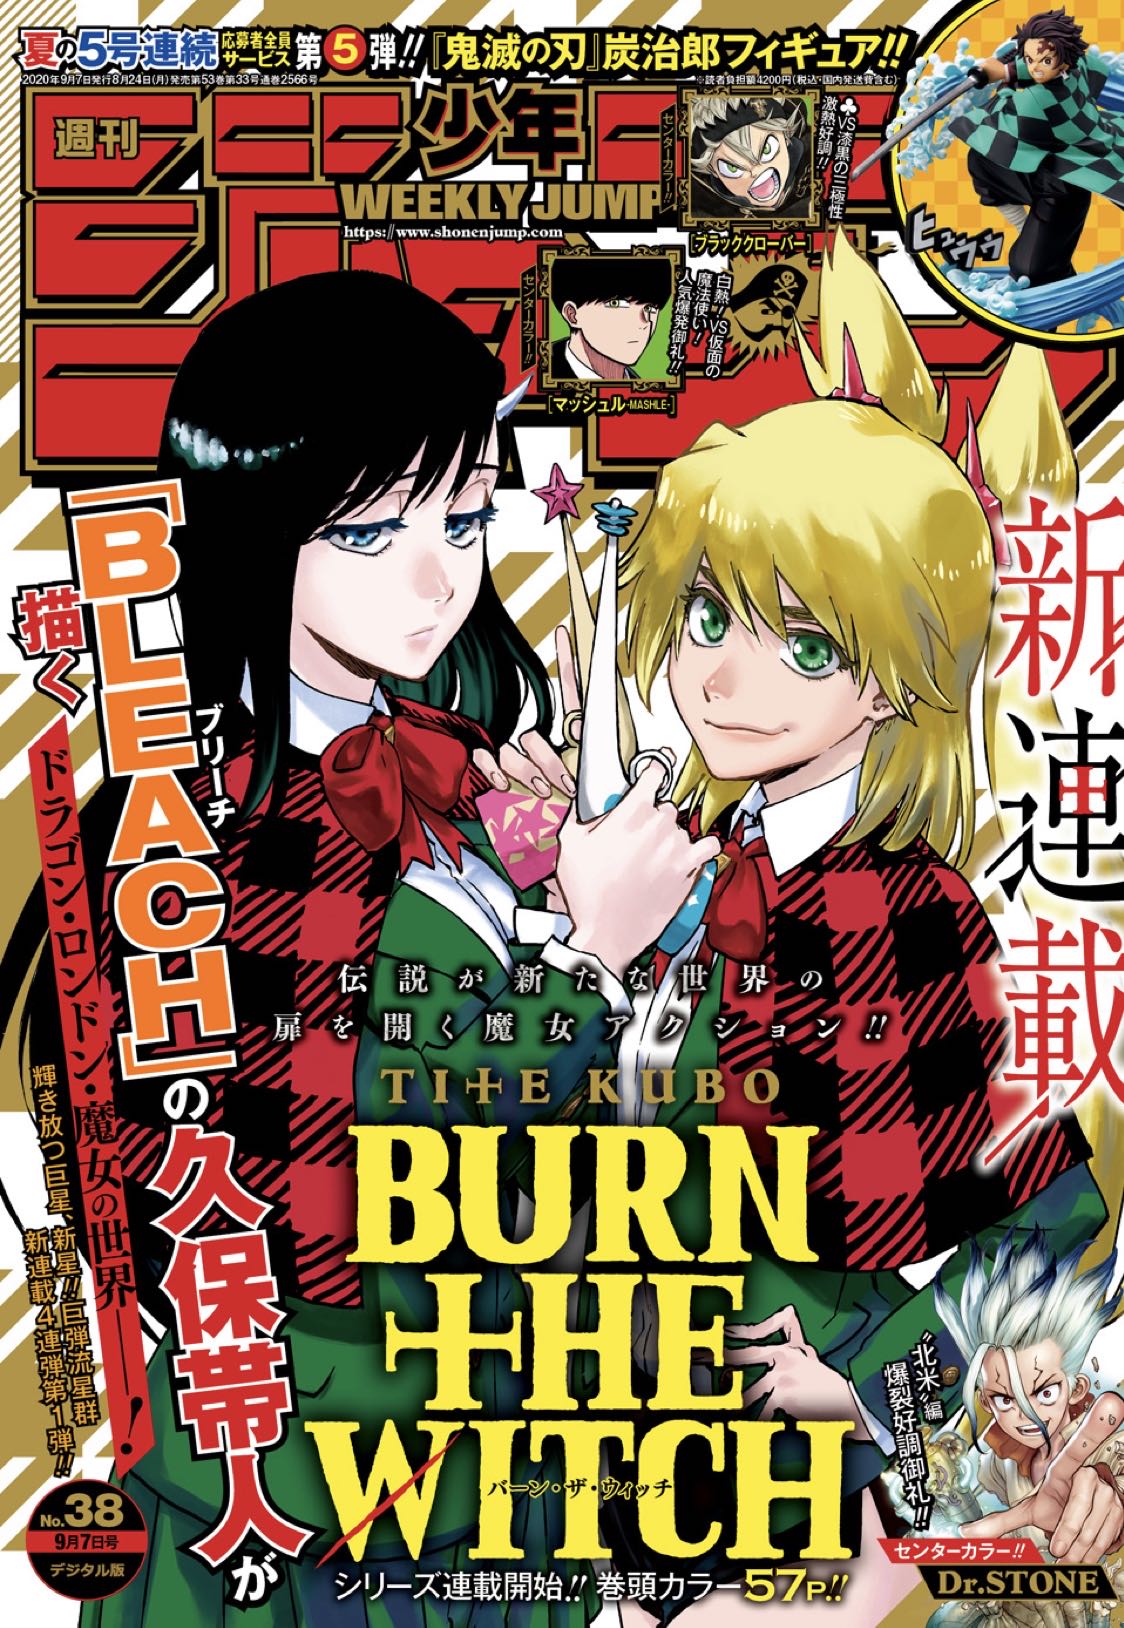 BURN THE WITCH 0巻 バーン・ザ・ウィッチ 久保帯人 - 少年漫画